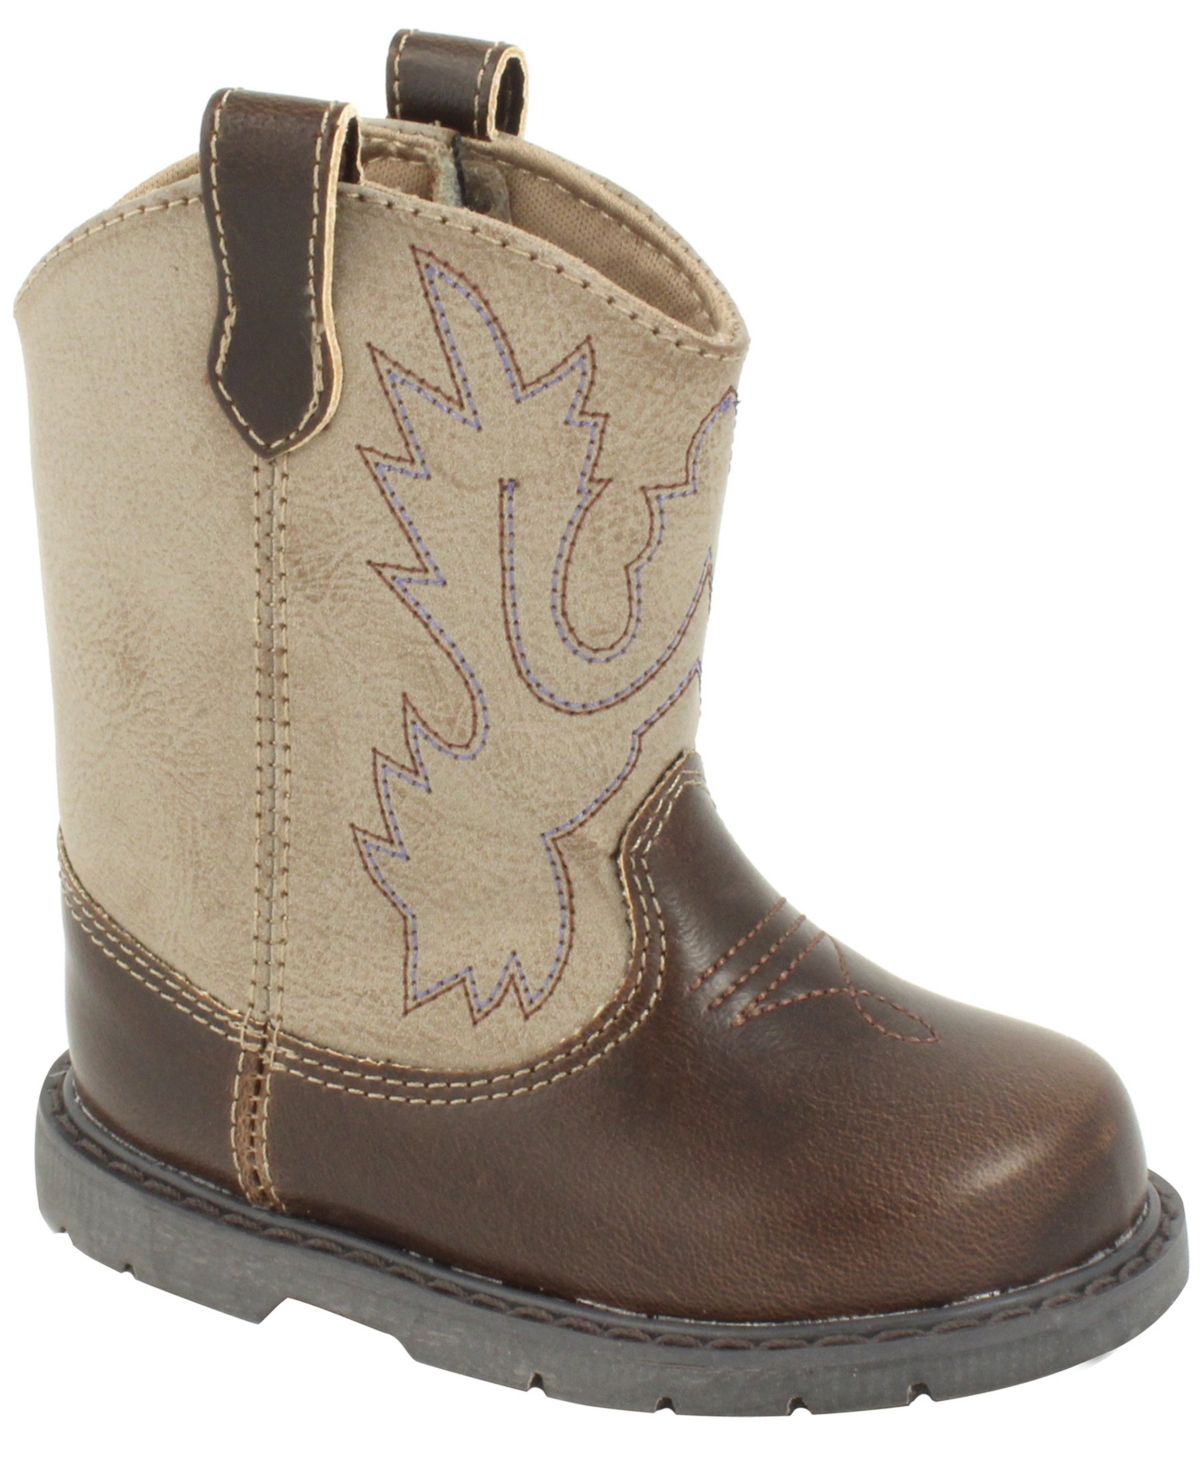 Shop Baby Deer Baby Boys Or Baby Girls Boot With Embroidery And Piping In Brown